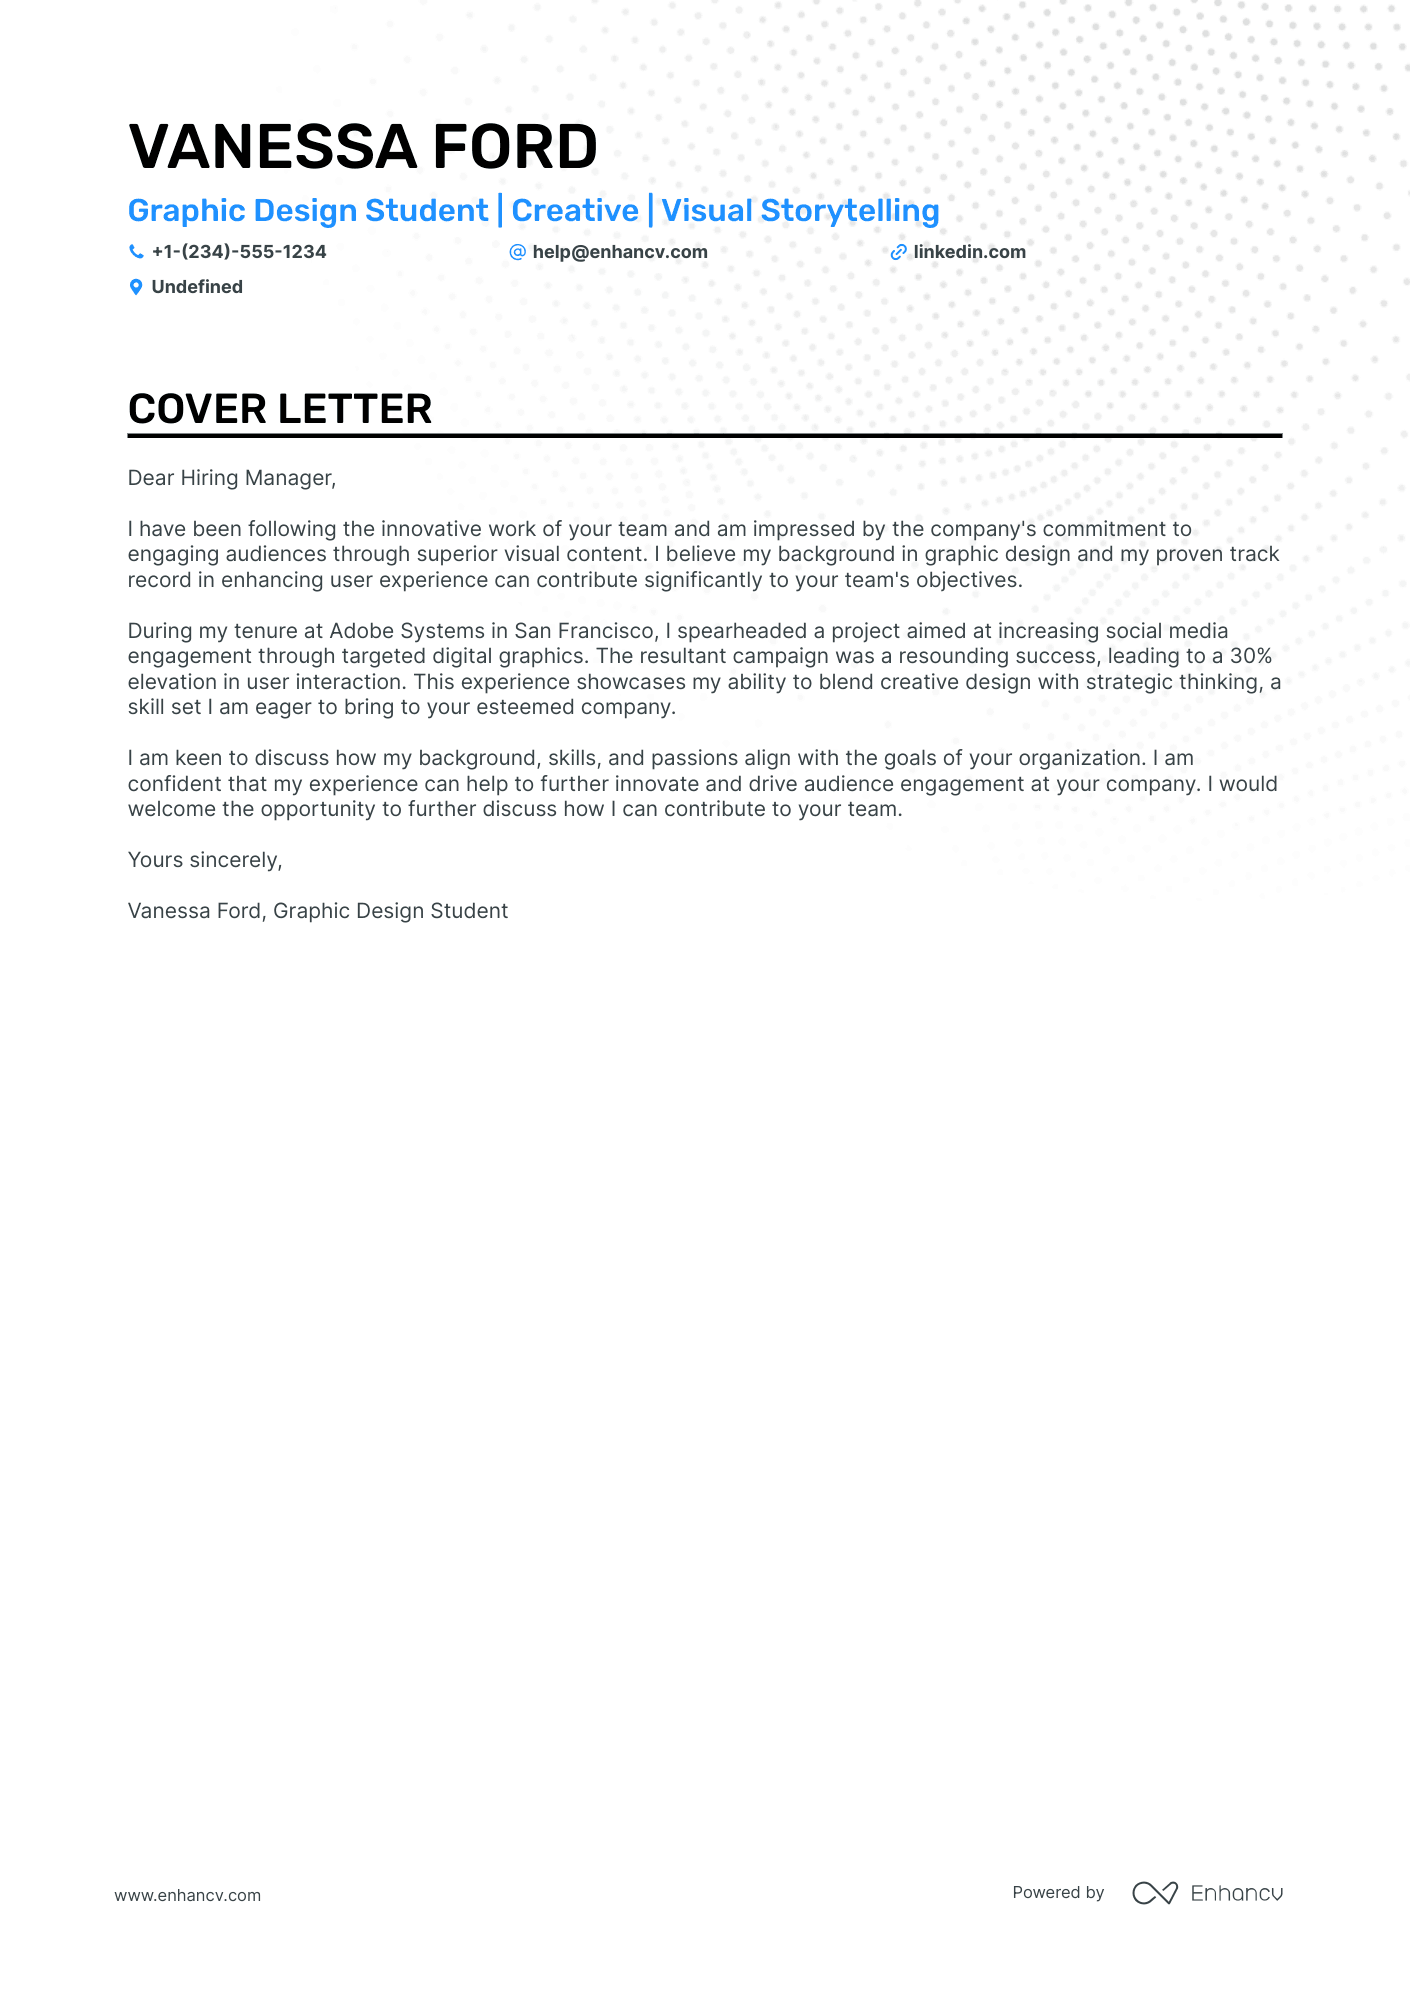 Graphic Design Student cover letter